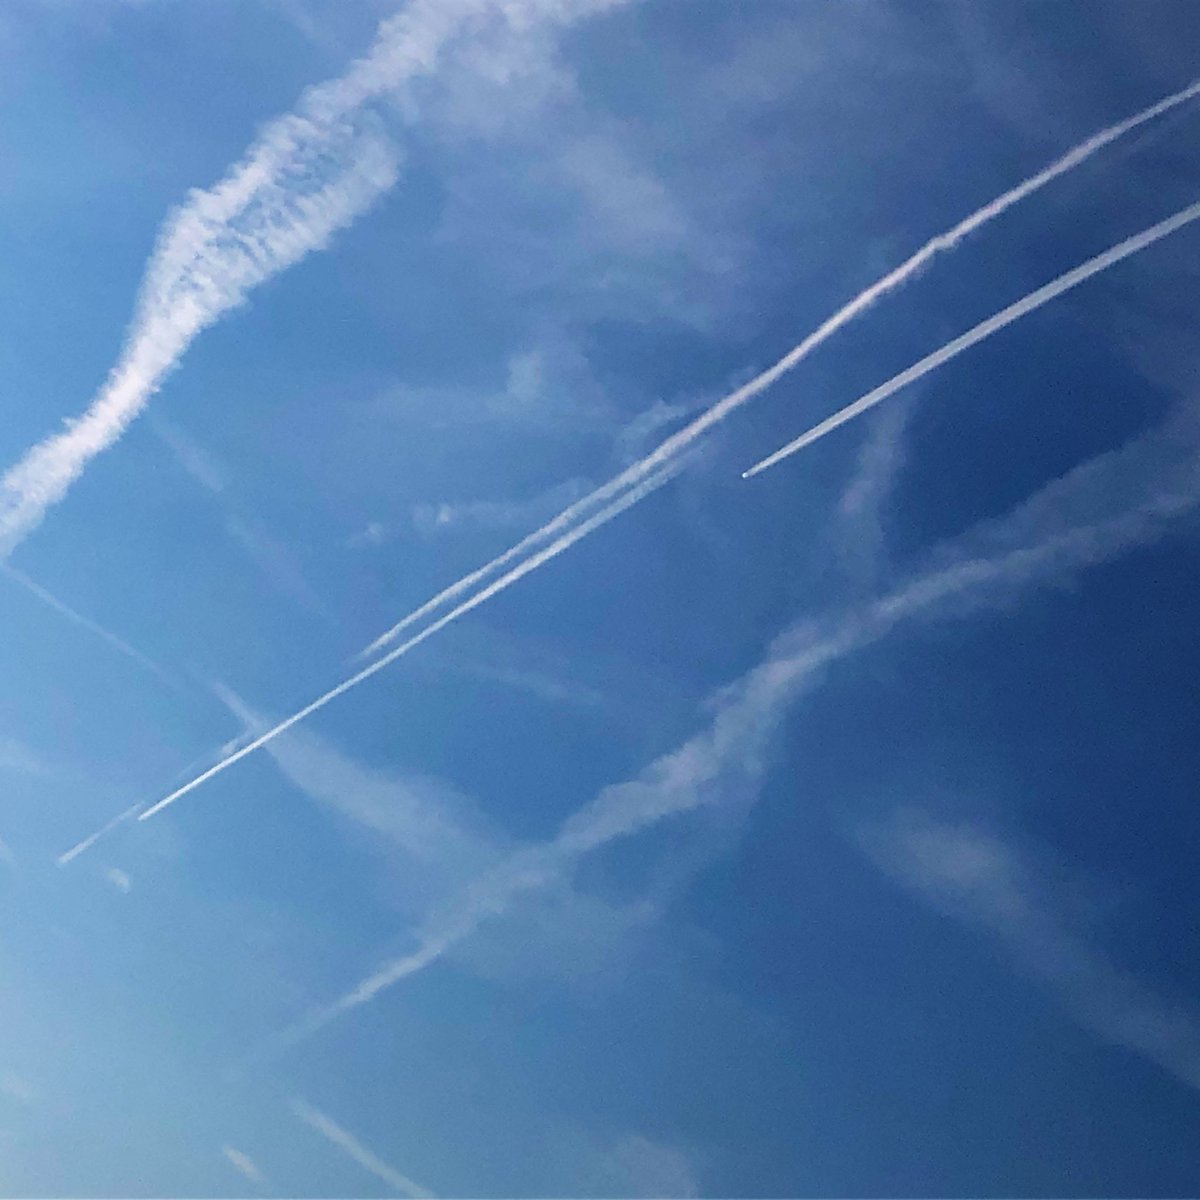 They say climate change is a worldwide problem we must act upon. Yet one mode of transport travels worldwide on a regular basis spewing out trails that expand into artificial clouds impacting the weather by trapping heat, either causing droughts or floods depending on conditions?